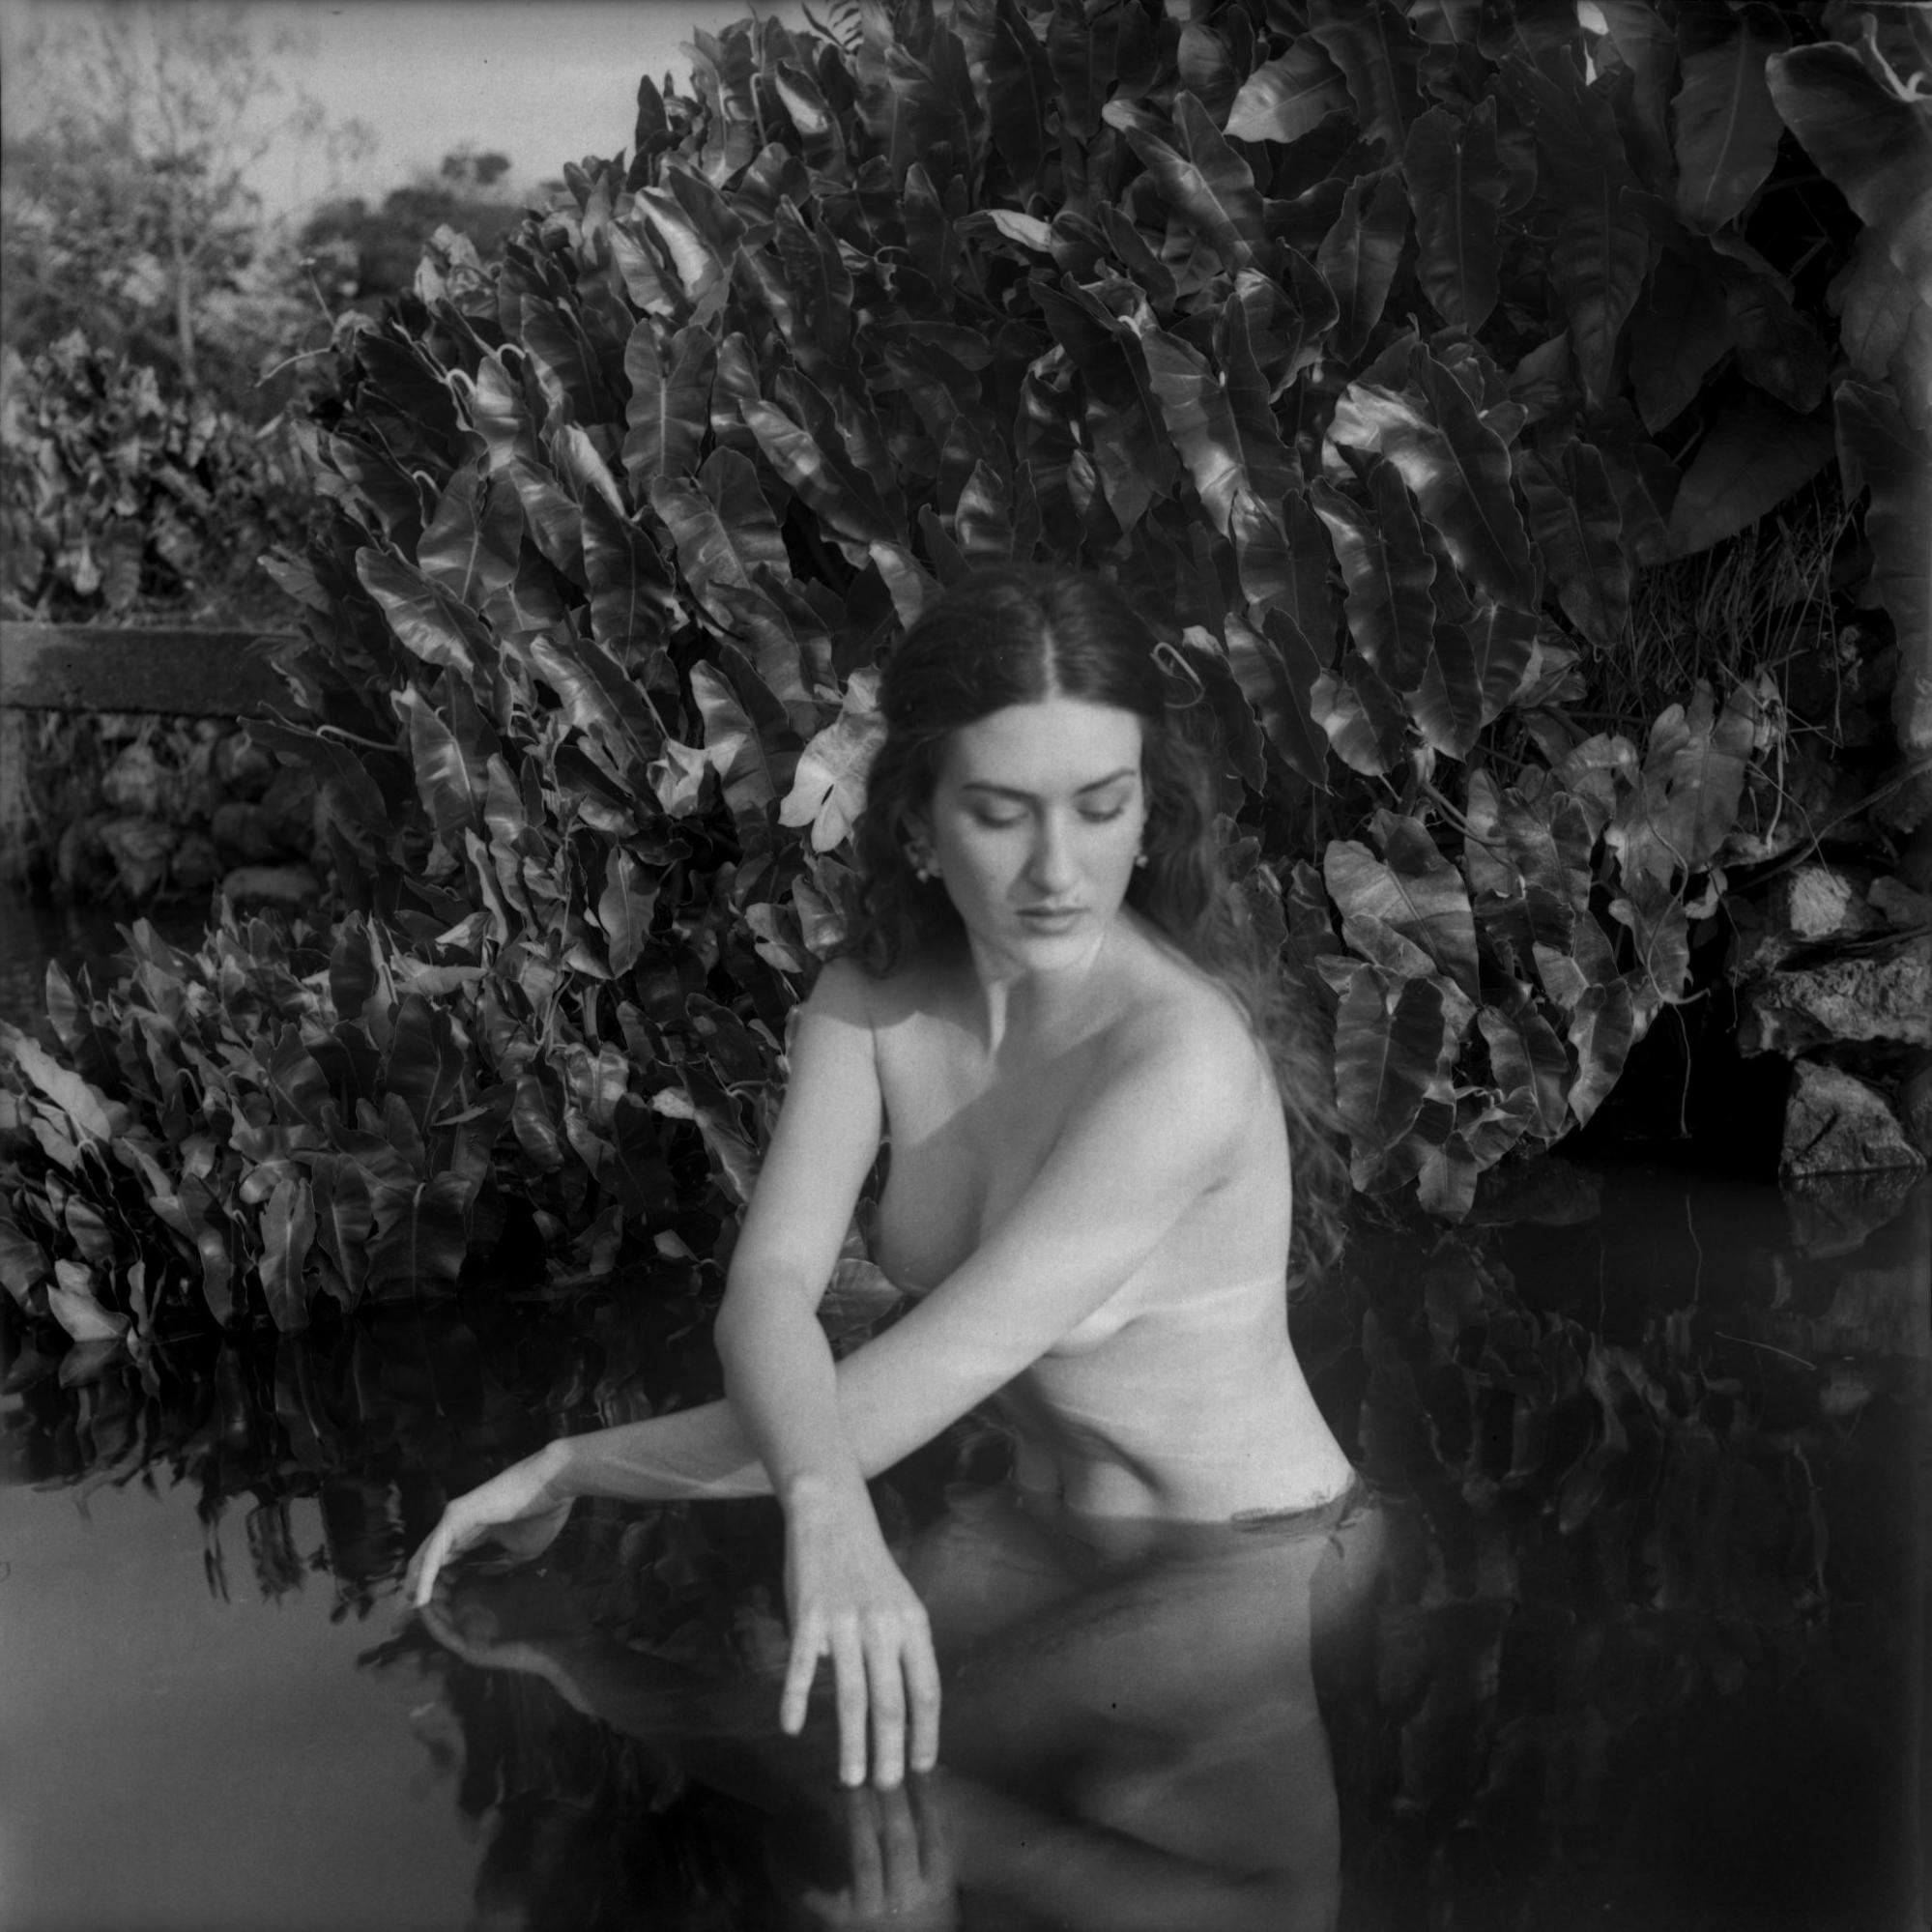 Untitled Self Portrait, Body of Water series, Ilford Delta 100, Yashica Mat 124g. - . Clara Anaujo for In Focus